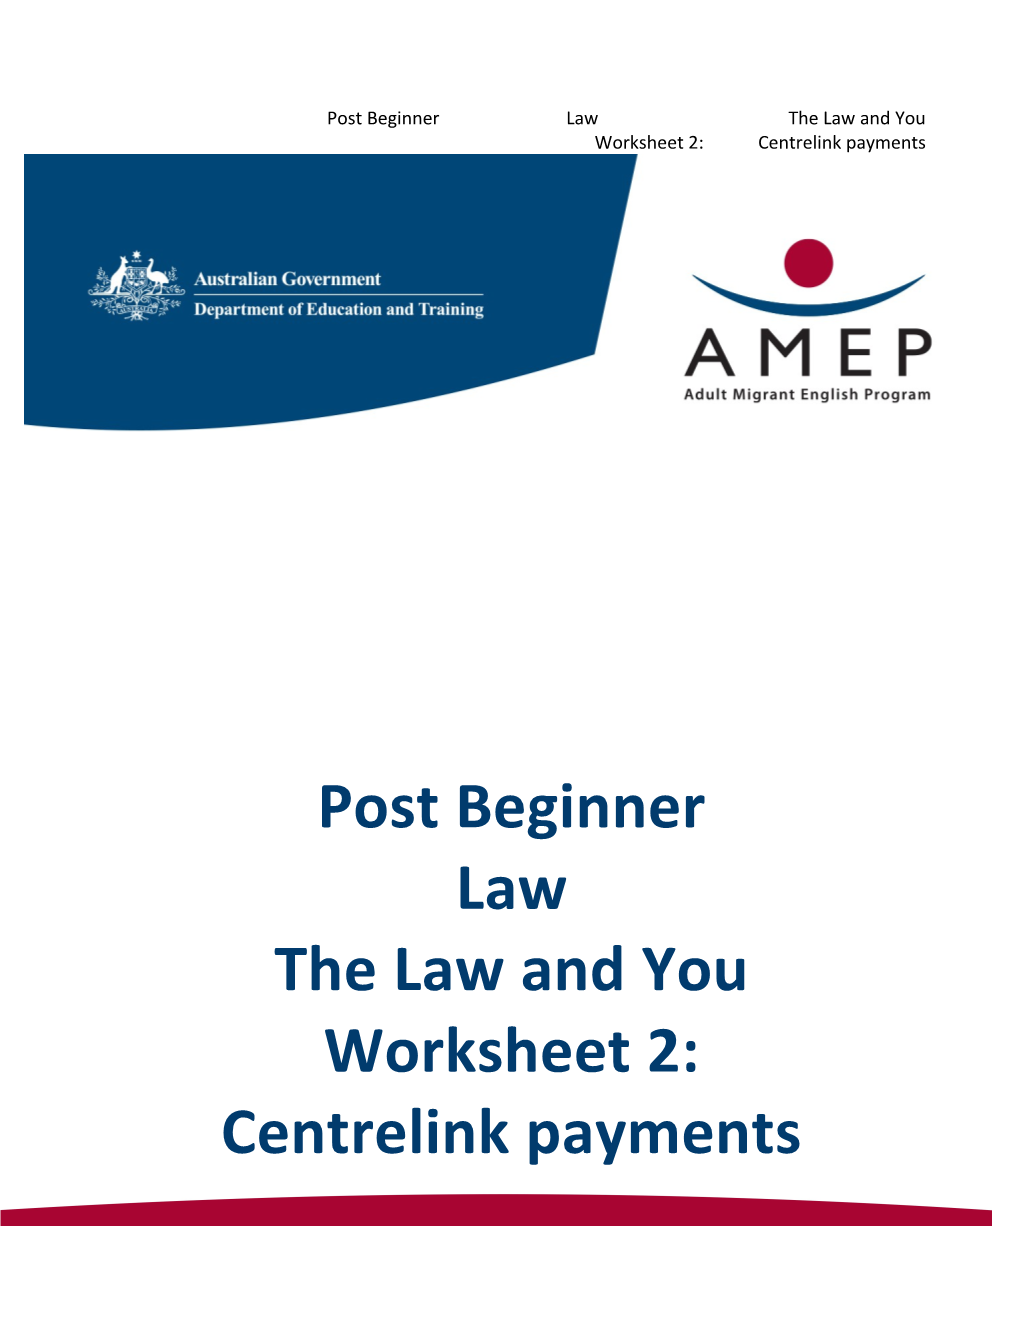 Post Beginner Law the Law and You Worksheet 2: Centrelink Payments